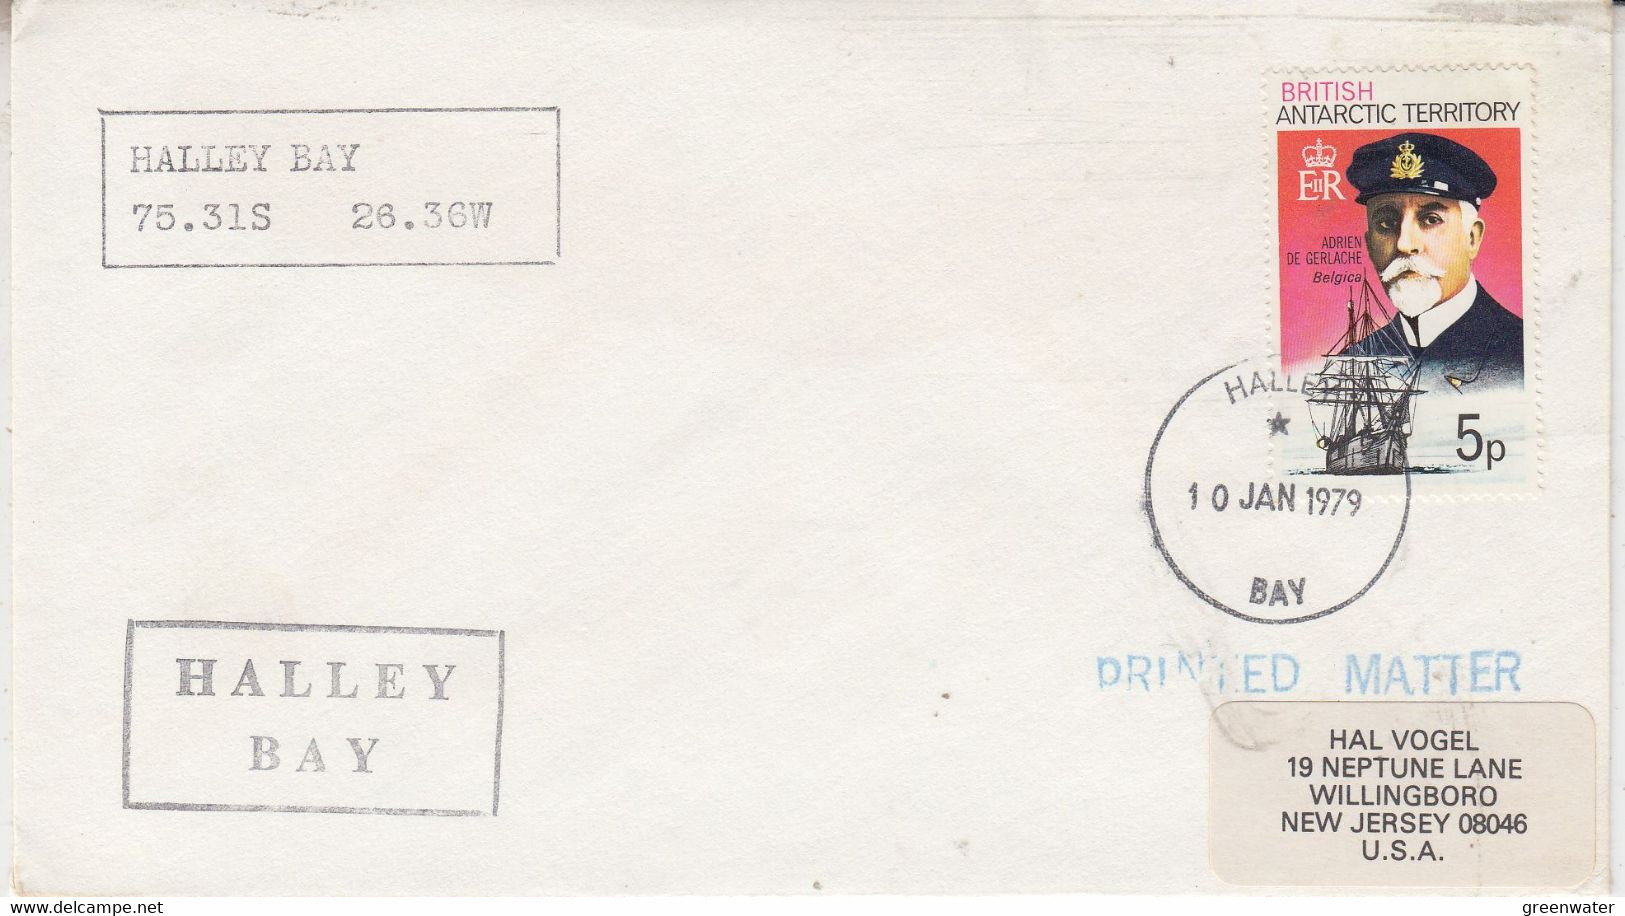 British Antarctic Territory (BAT) Halley Bay Cover Ca Halley 10 JAN 1979 (TB166A) - Covers & Documents